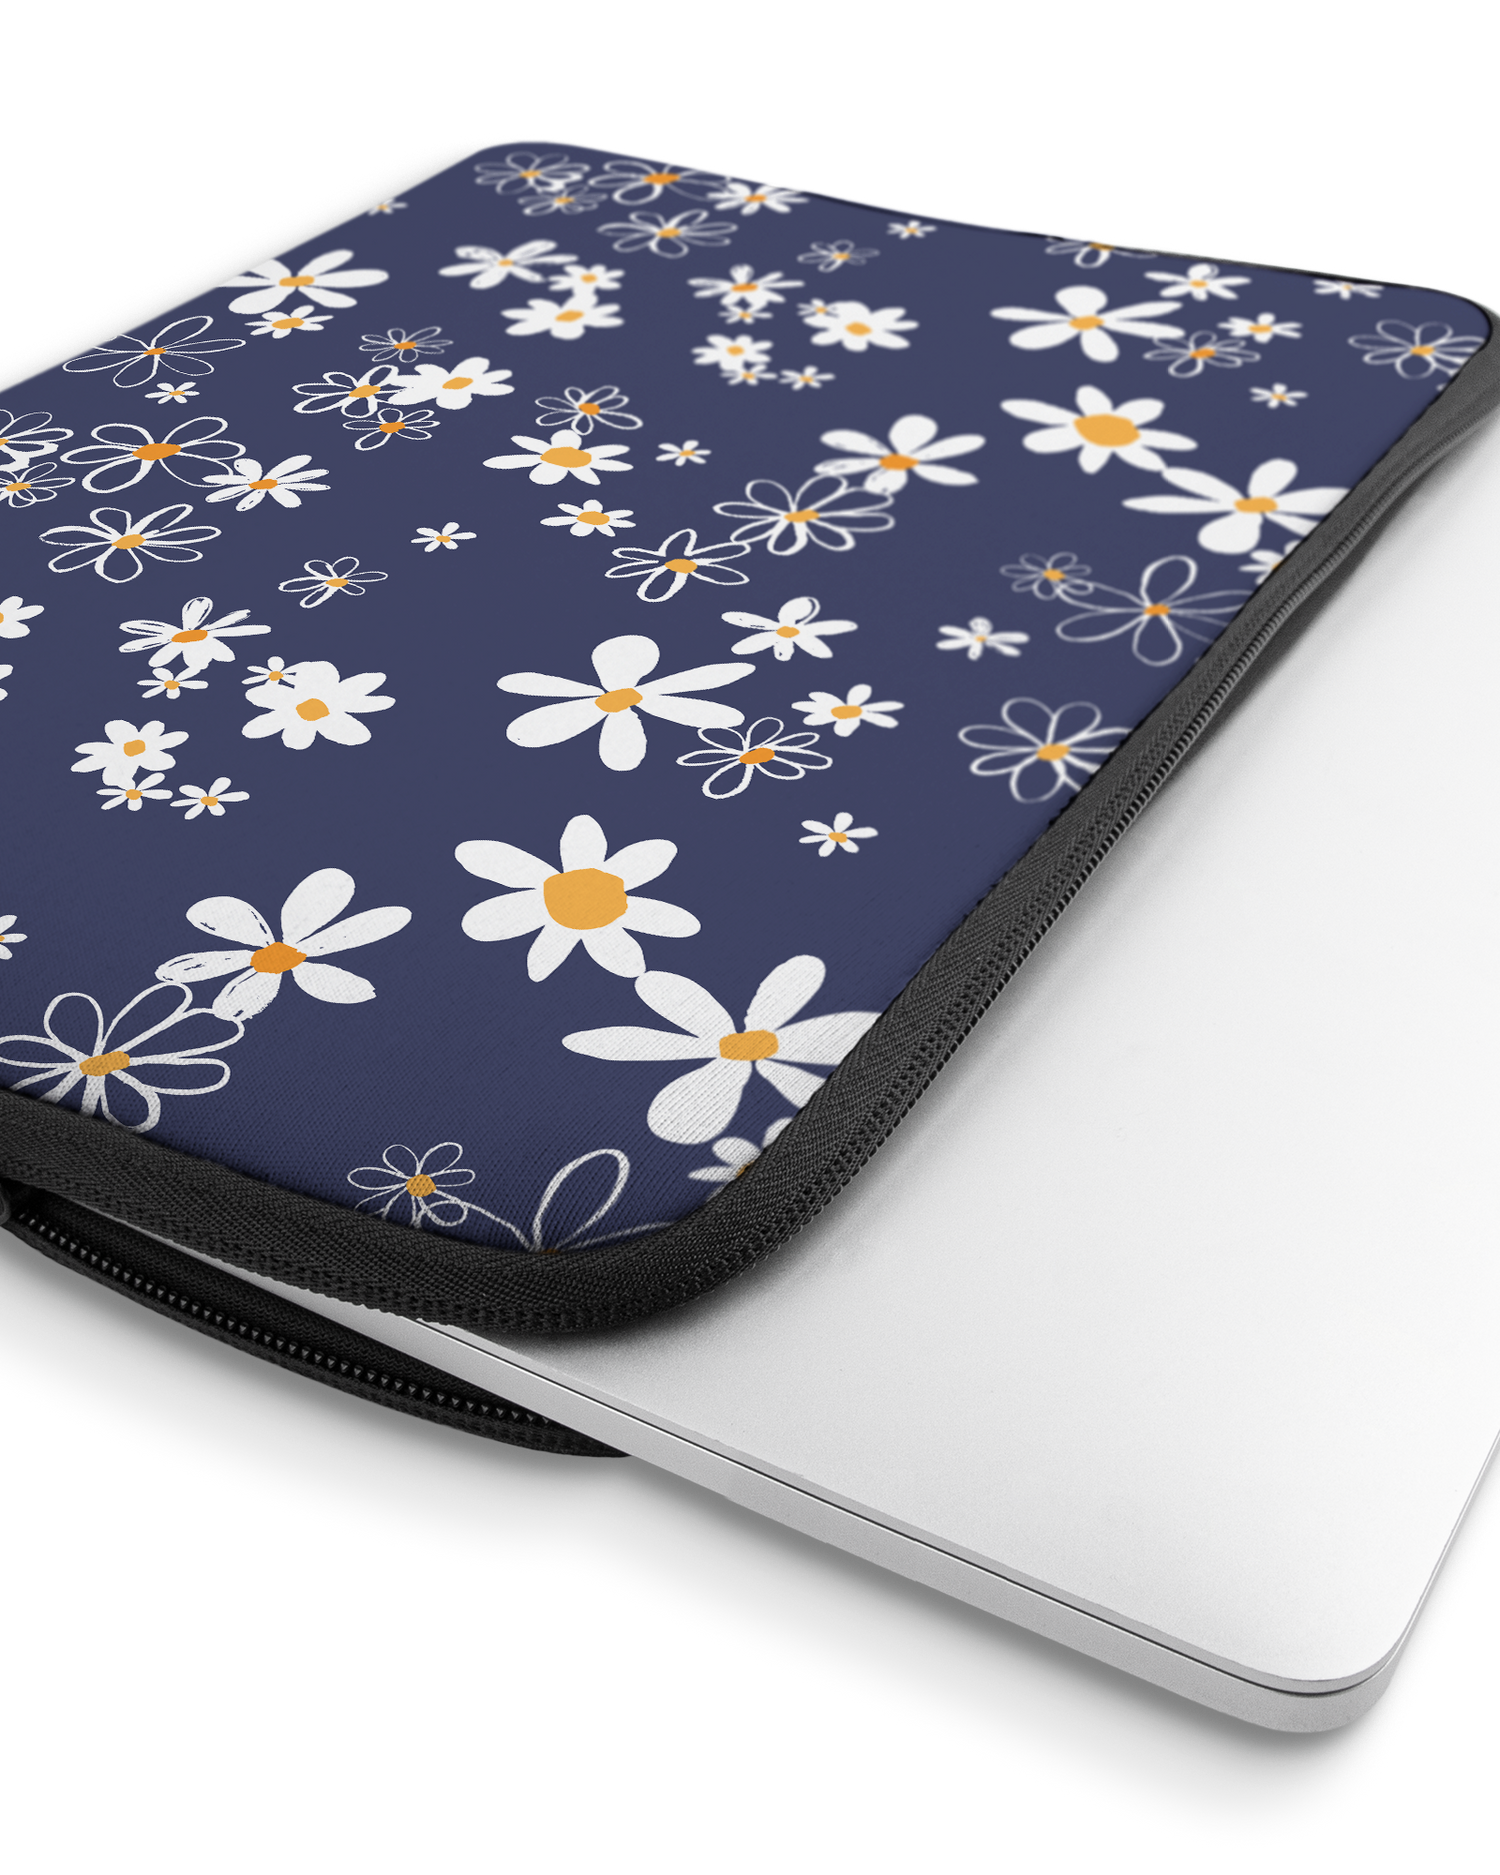 Navy Daisies Laptop Case 16 inch with device inside